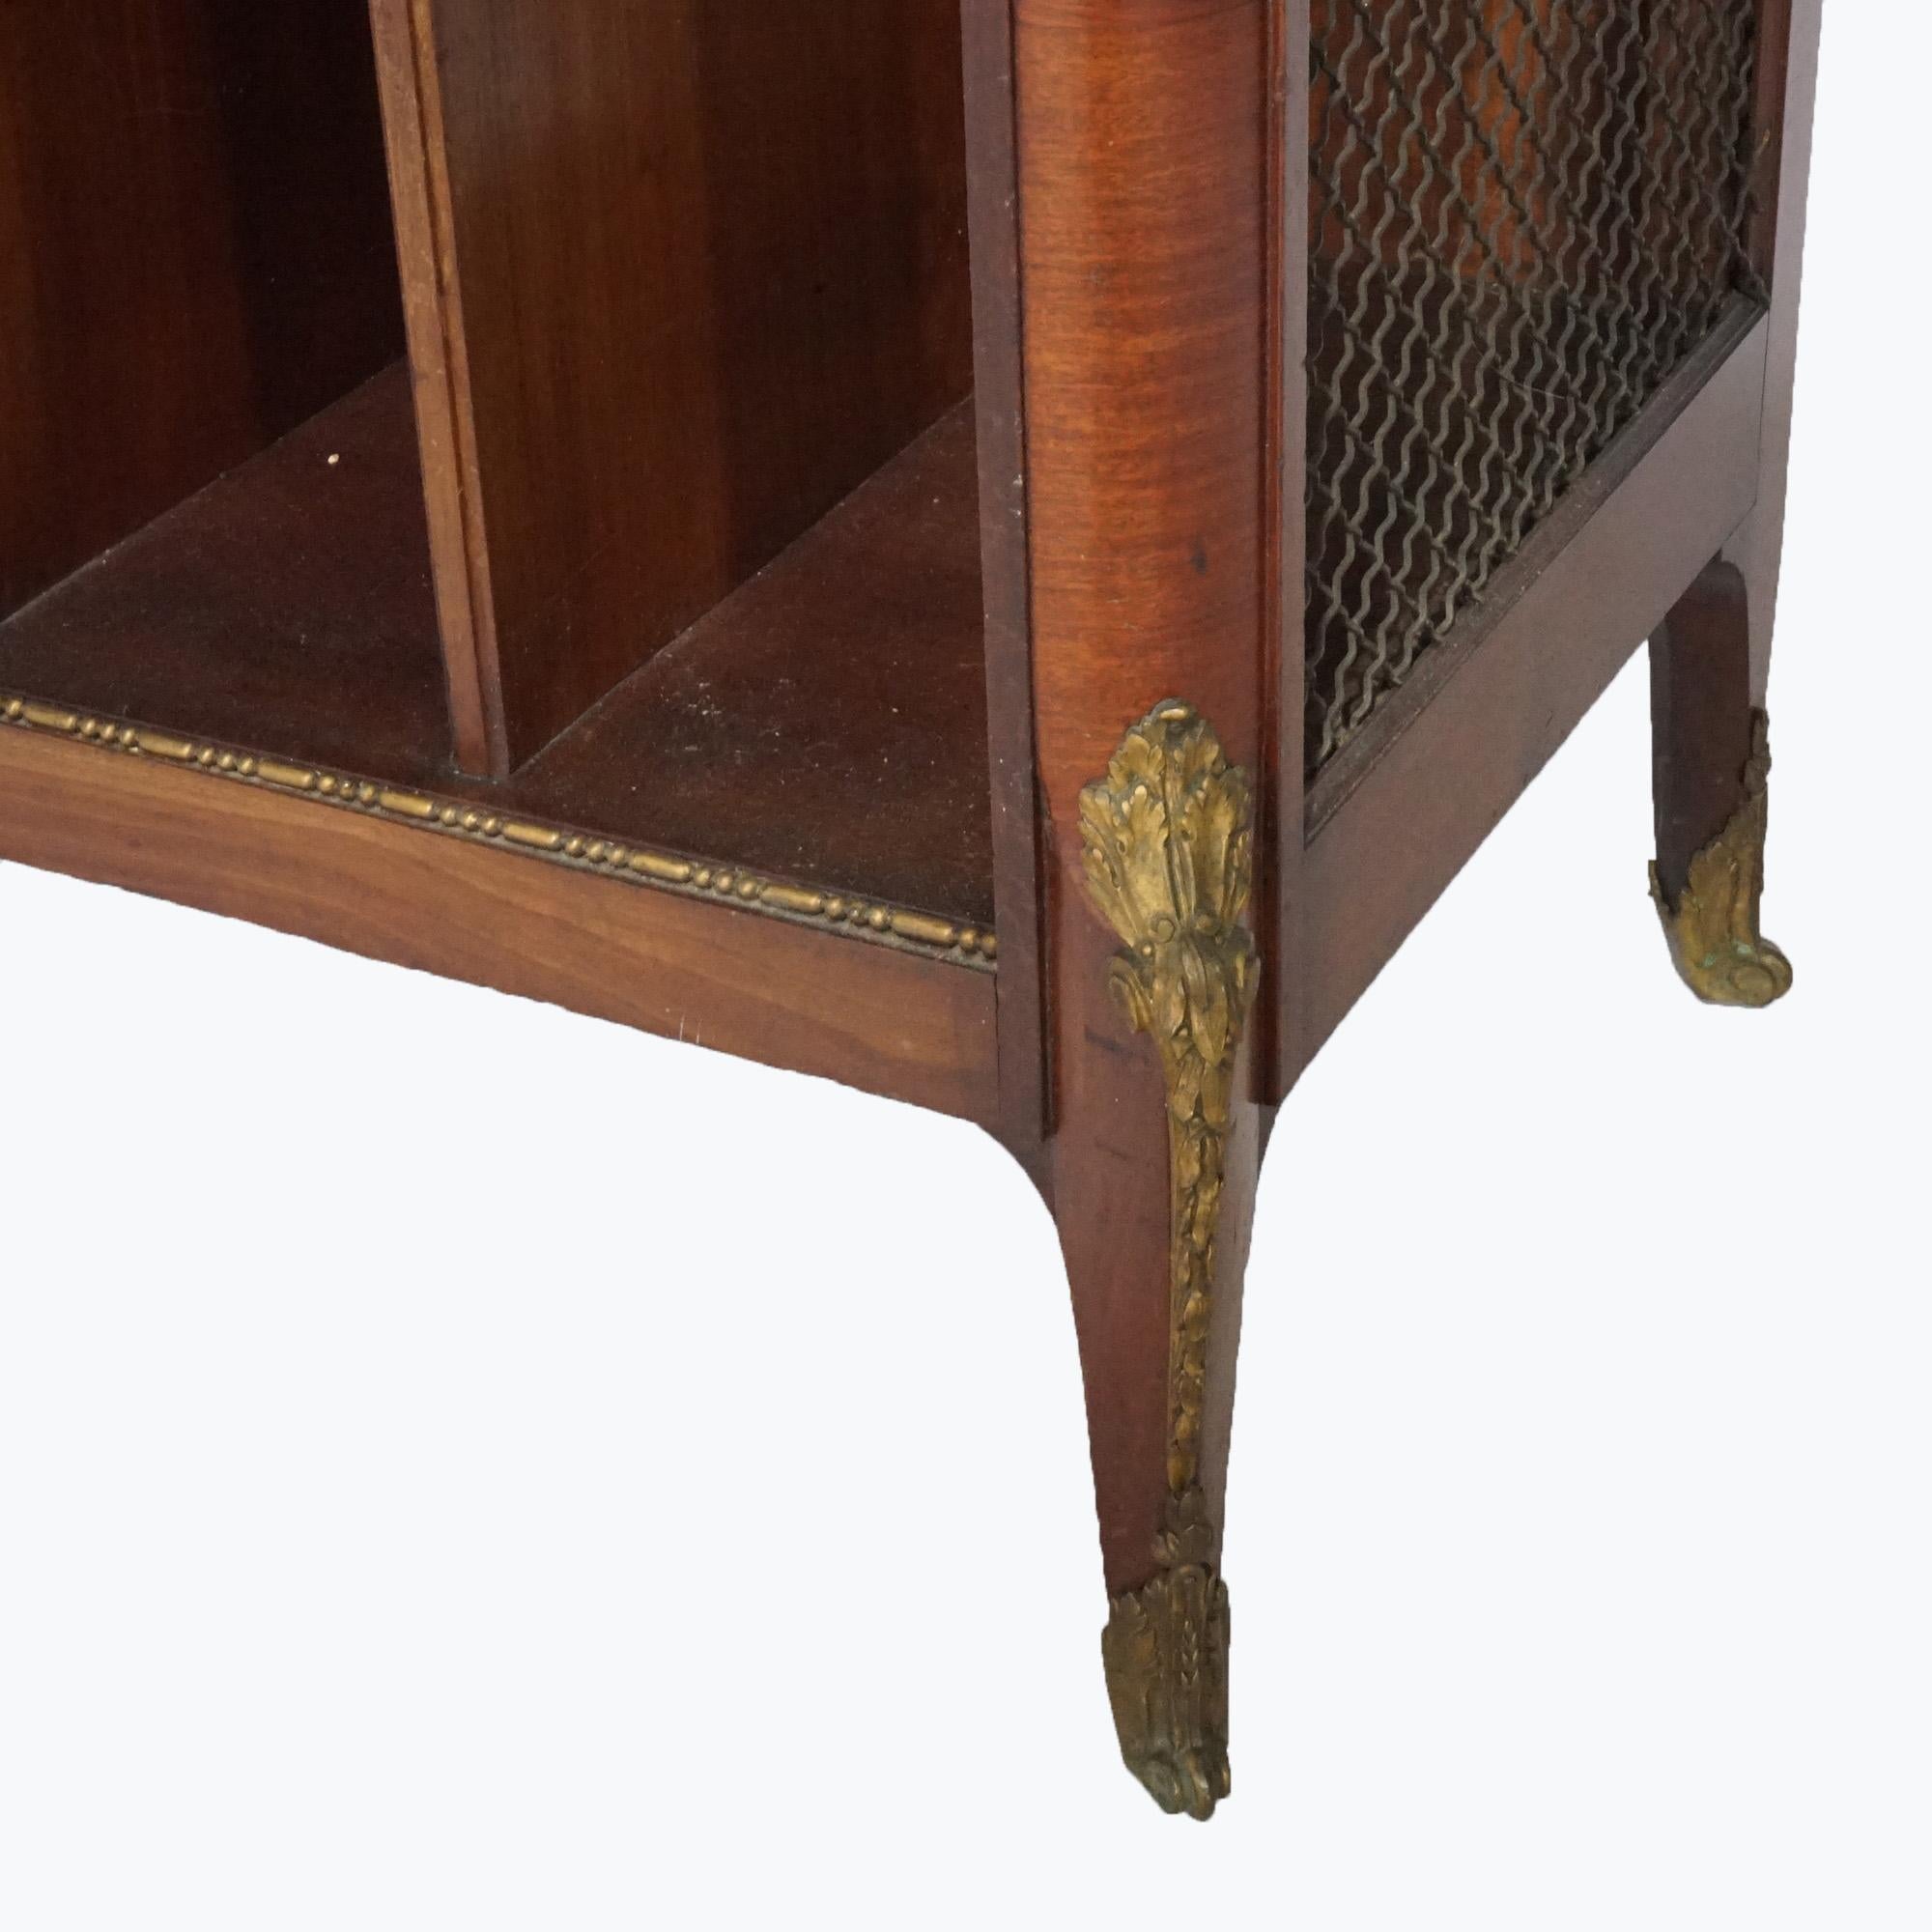 Antique French Kingwood & Satinwood Music Cabinet with Ormolu Mounts circa 1920 For Sale 9